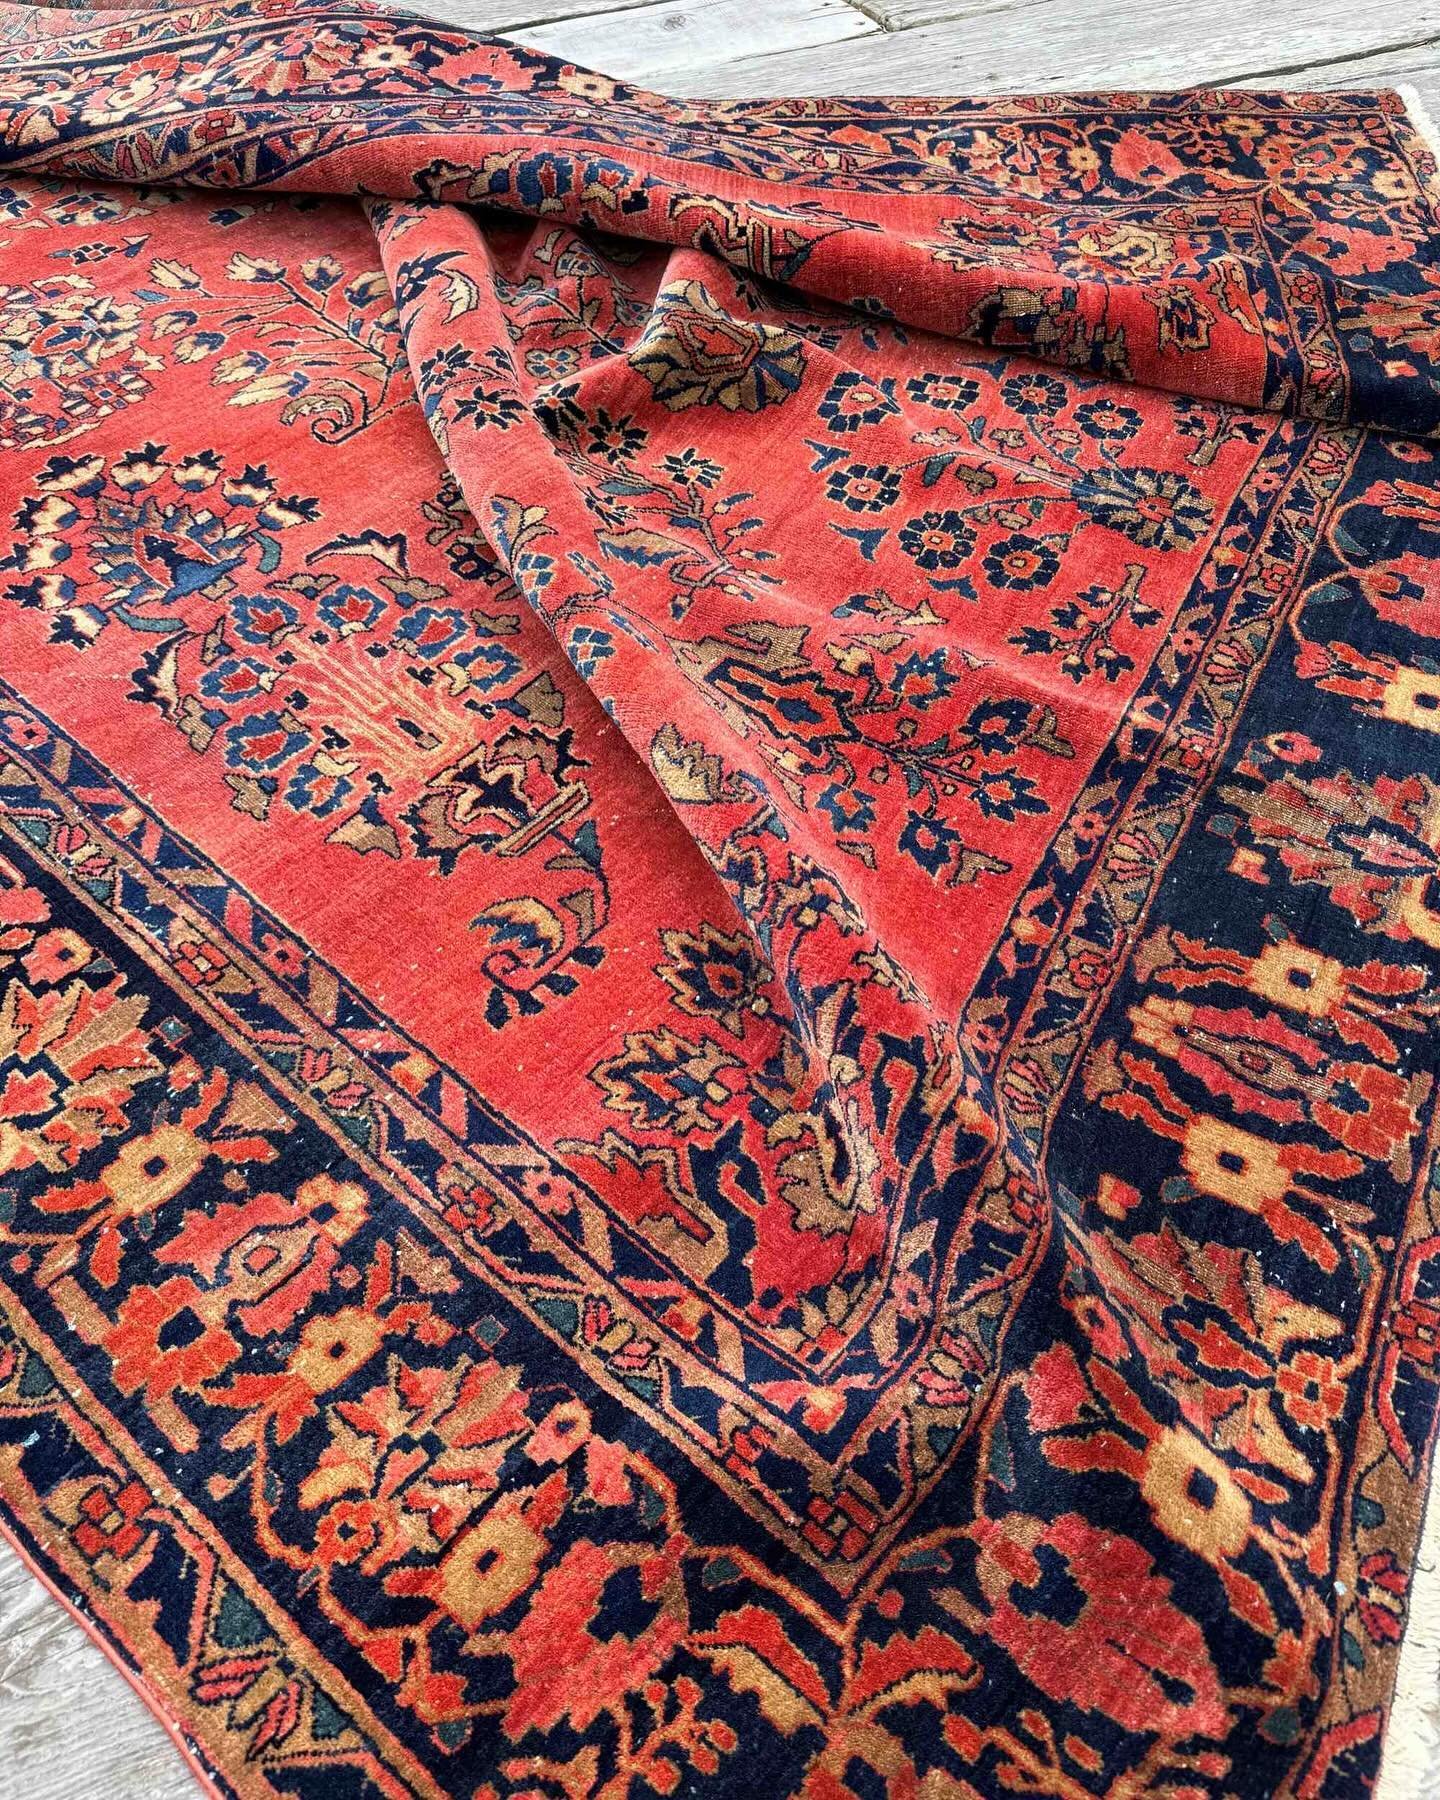 Velvet-like wool and exotic stylized florals are the hallmarks of antique Persian Sarouk rugs. The stunning flame red ground on this gorgeous example is well suited to any interior craving a textured country home impression. It measures 8&rsquo;3&rdq